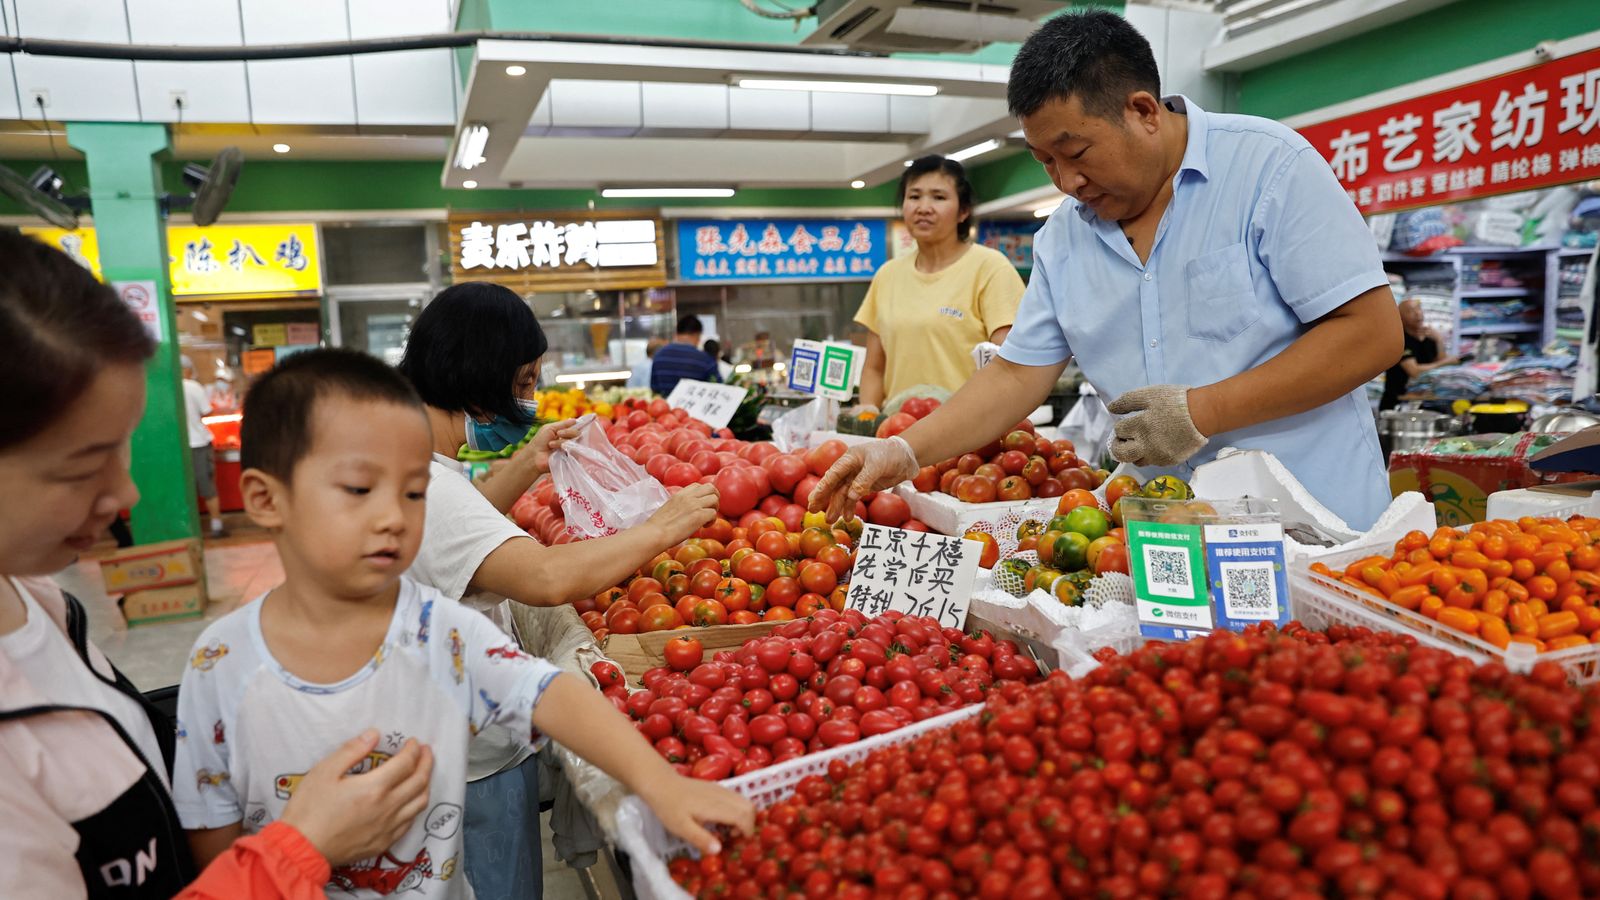 Fears over deflation in China as prices plummet